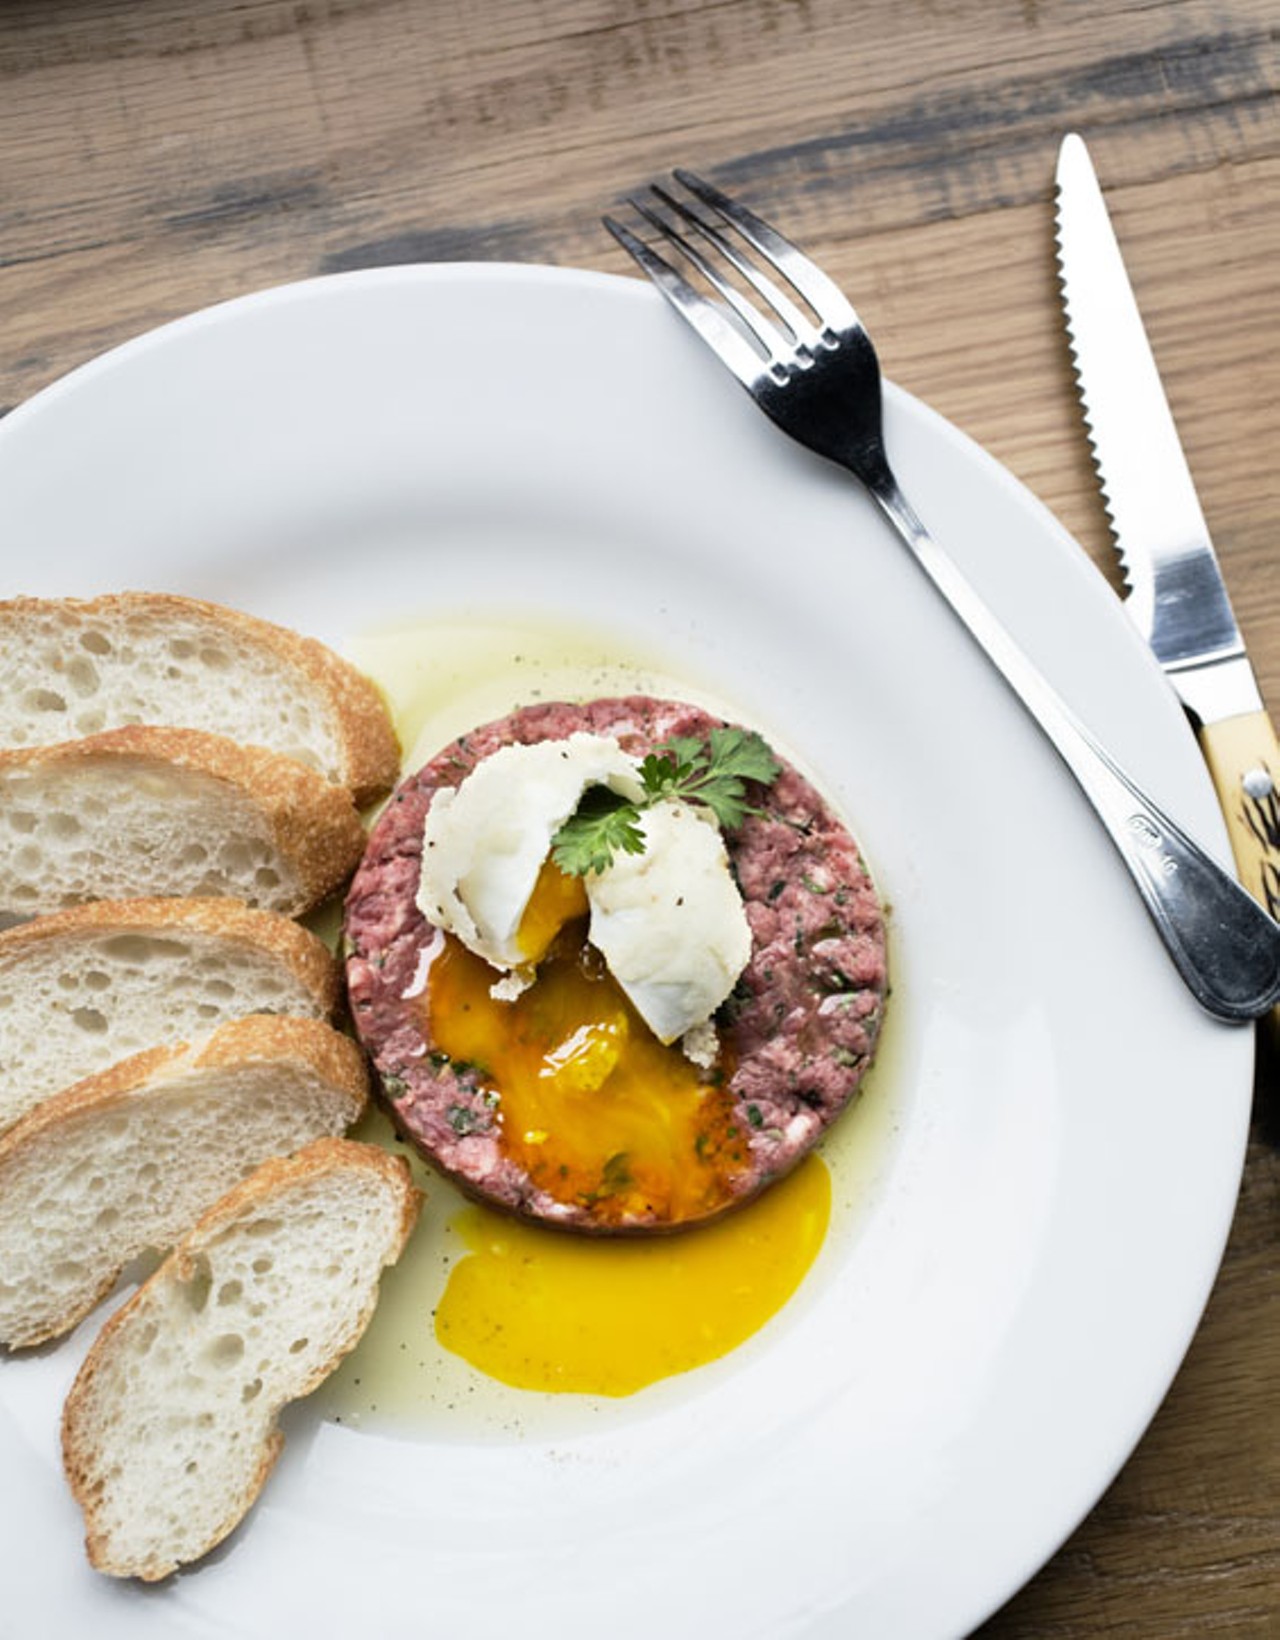 The steak tartare is hand-cut beef tenderloin, capers and cornichons topped with a golden egg and served with a baguette.